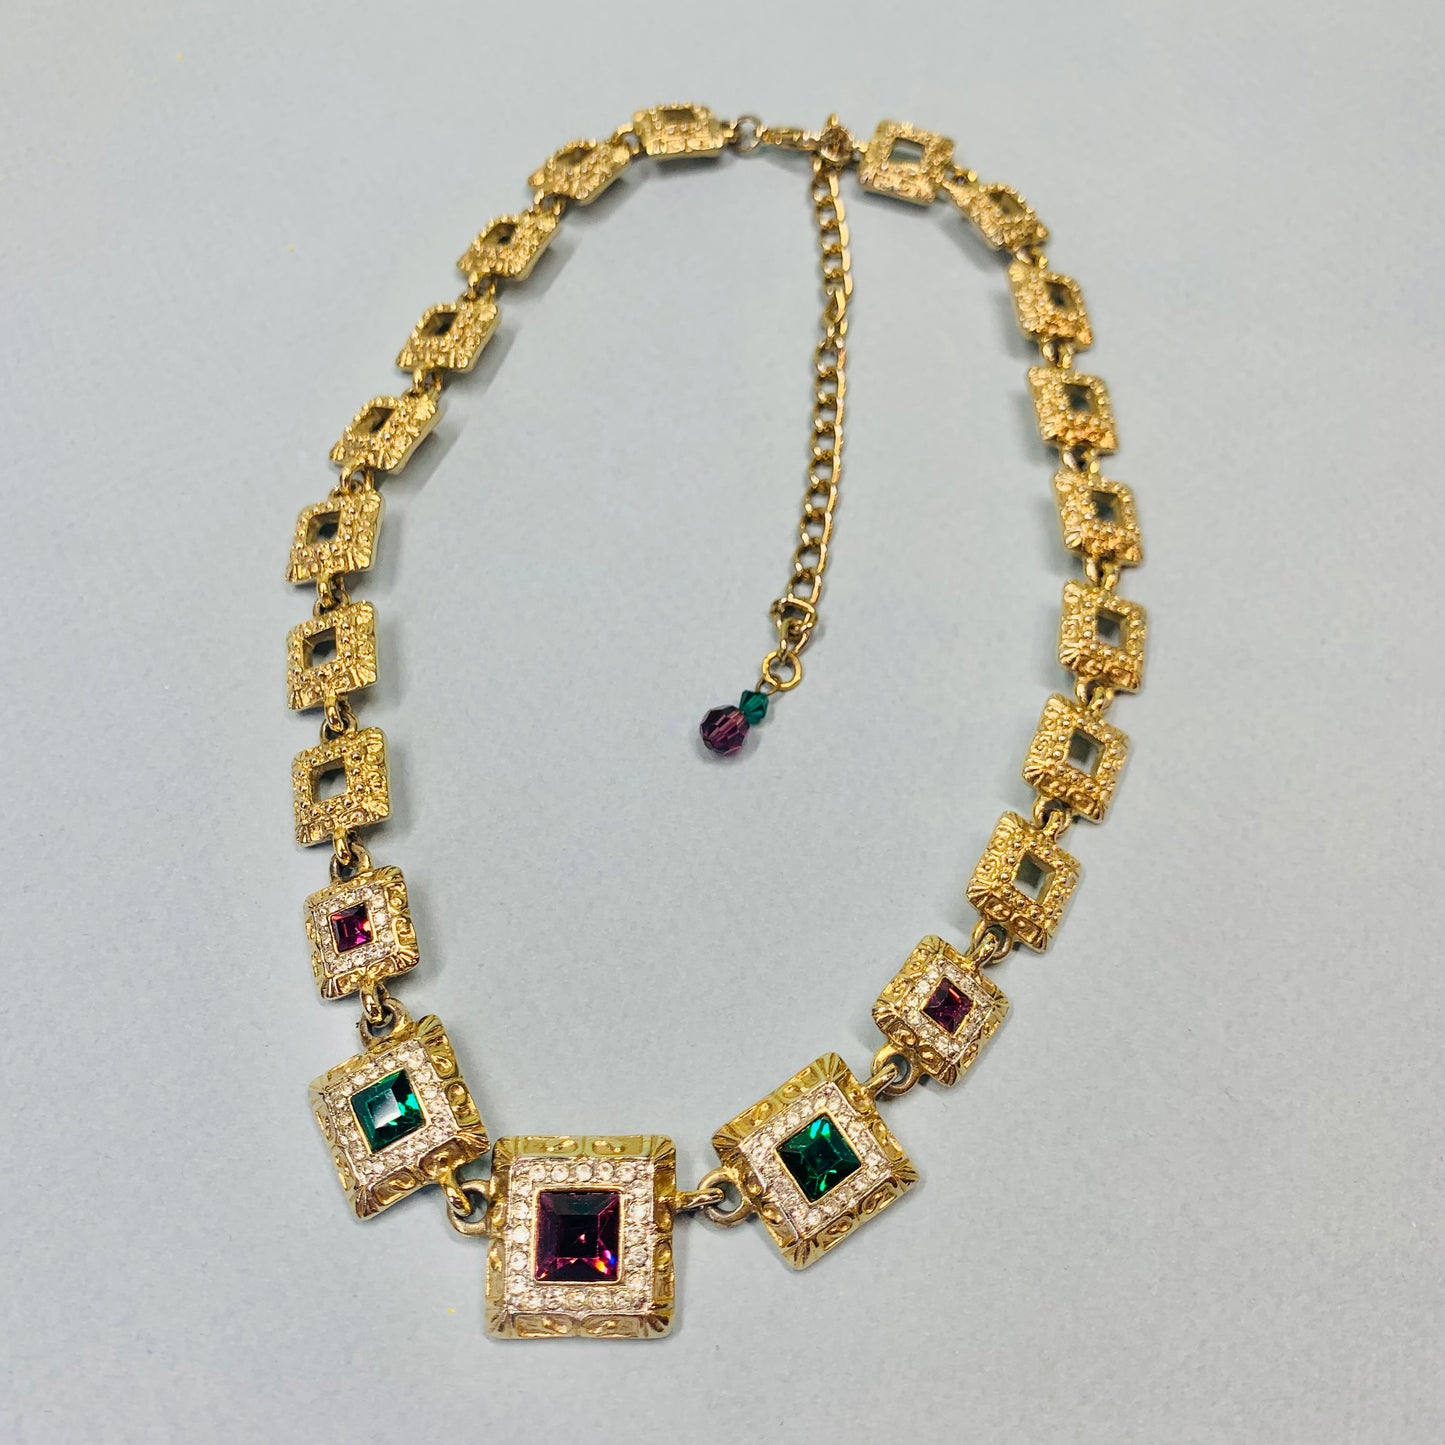 Extremely rare 1950s gold plated colour gem necklace in the tutti fruitti style